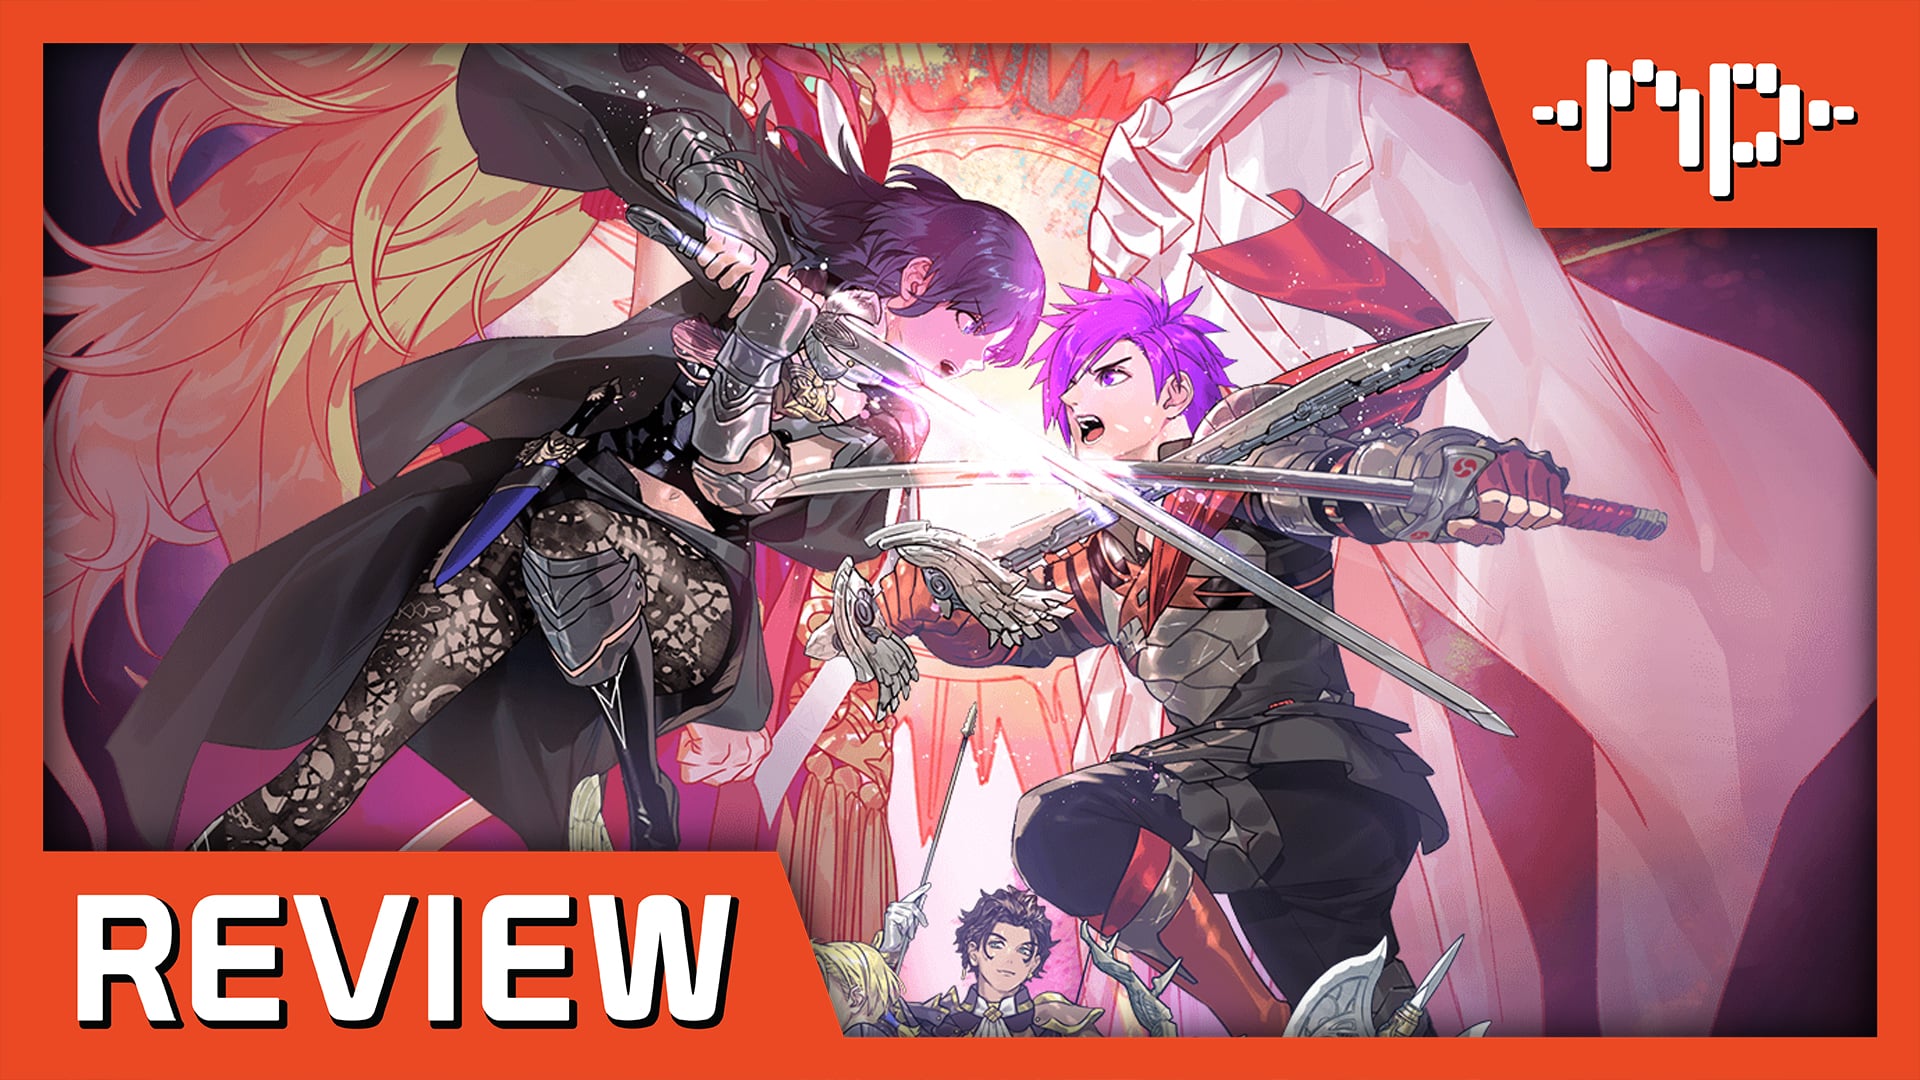 Fire Emblem Warriors: Three Hopes Review – A Continuation of Great Characters and Combat